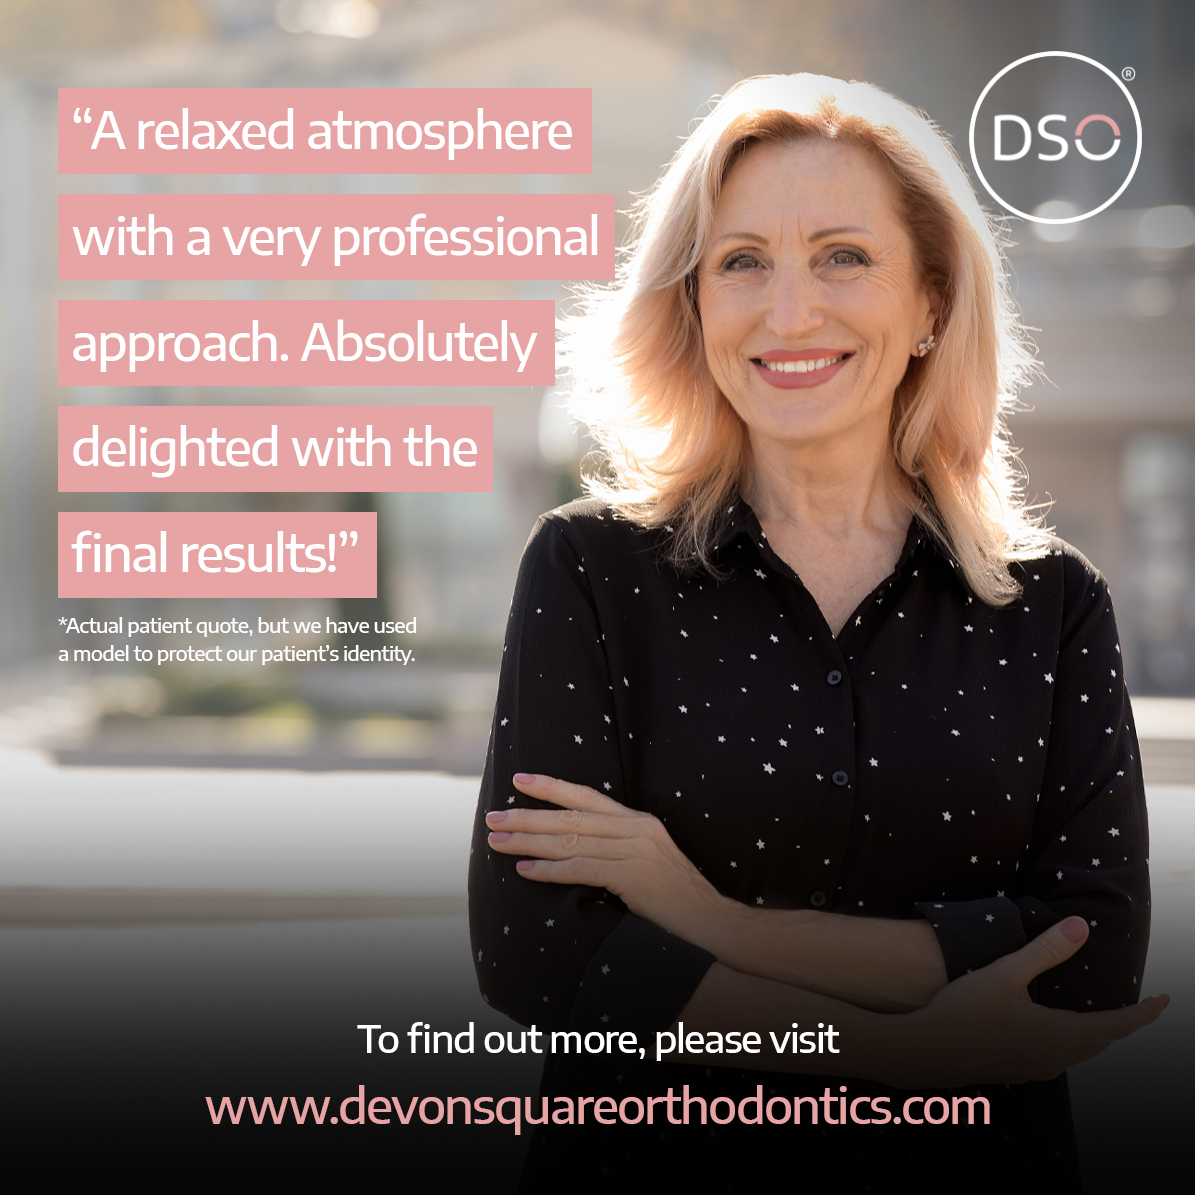 To start your journey with DSO, please visit devonsquareorthodontics.com or give us a call on 01626 335747

#orthodontics #orthodontist #devon #exeter #smile #confidence #specialistorthodontist